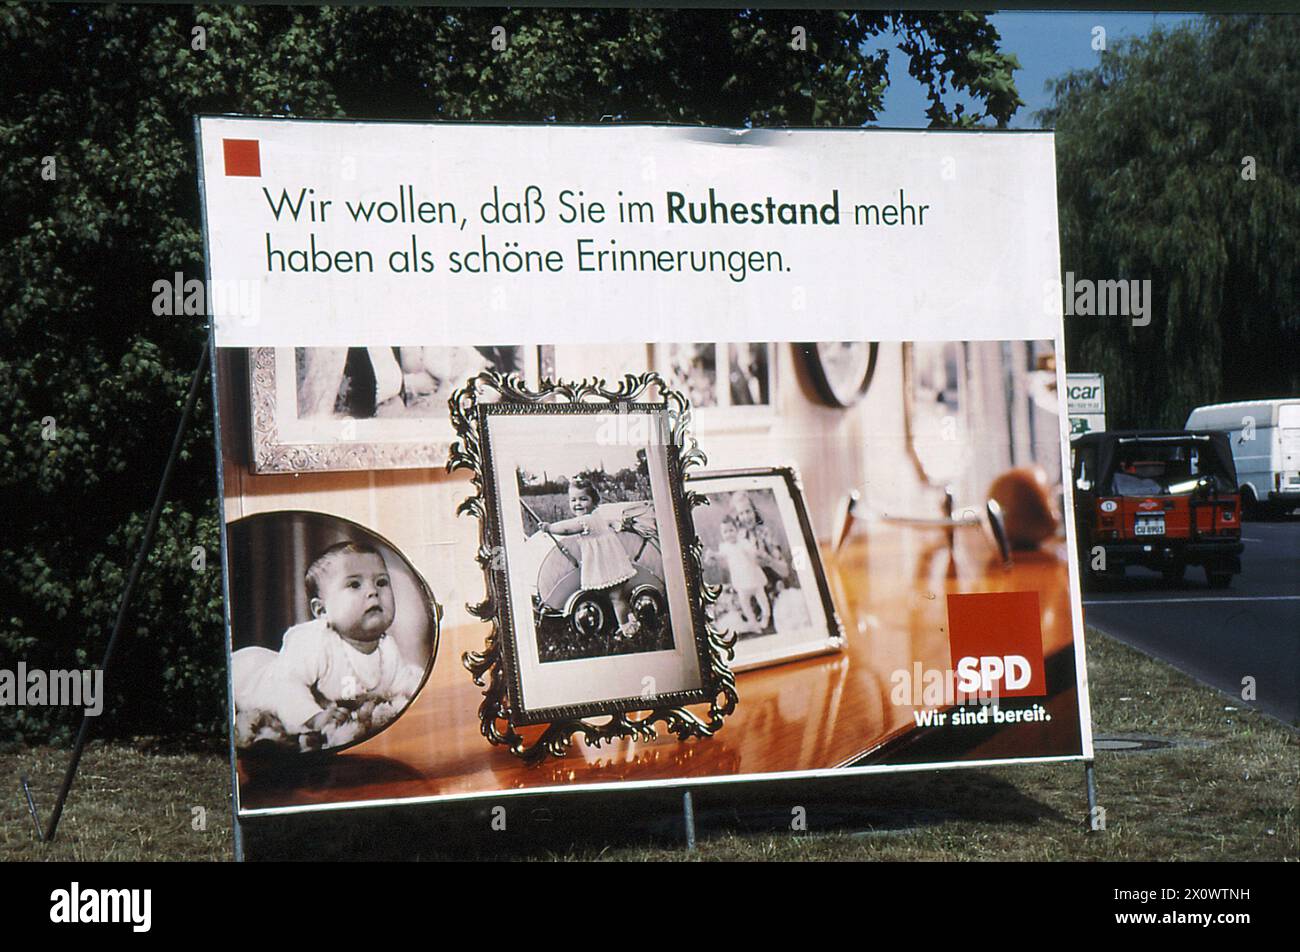 Berlin/Brandenburg/Germany/Billboards of Helmut Josef Michael Kohl, Geerman canchellor and leader of CDU been vandelized during general eelctions compiagn in Berlain and other billbaards are SPD are fine and people infront billboard in Berlin Brad nenburg Germany    (Photo.Francis Joseph Dean/Dean Pictures) Stock Photo